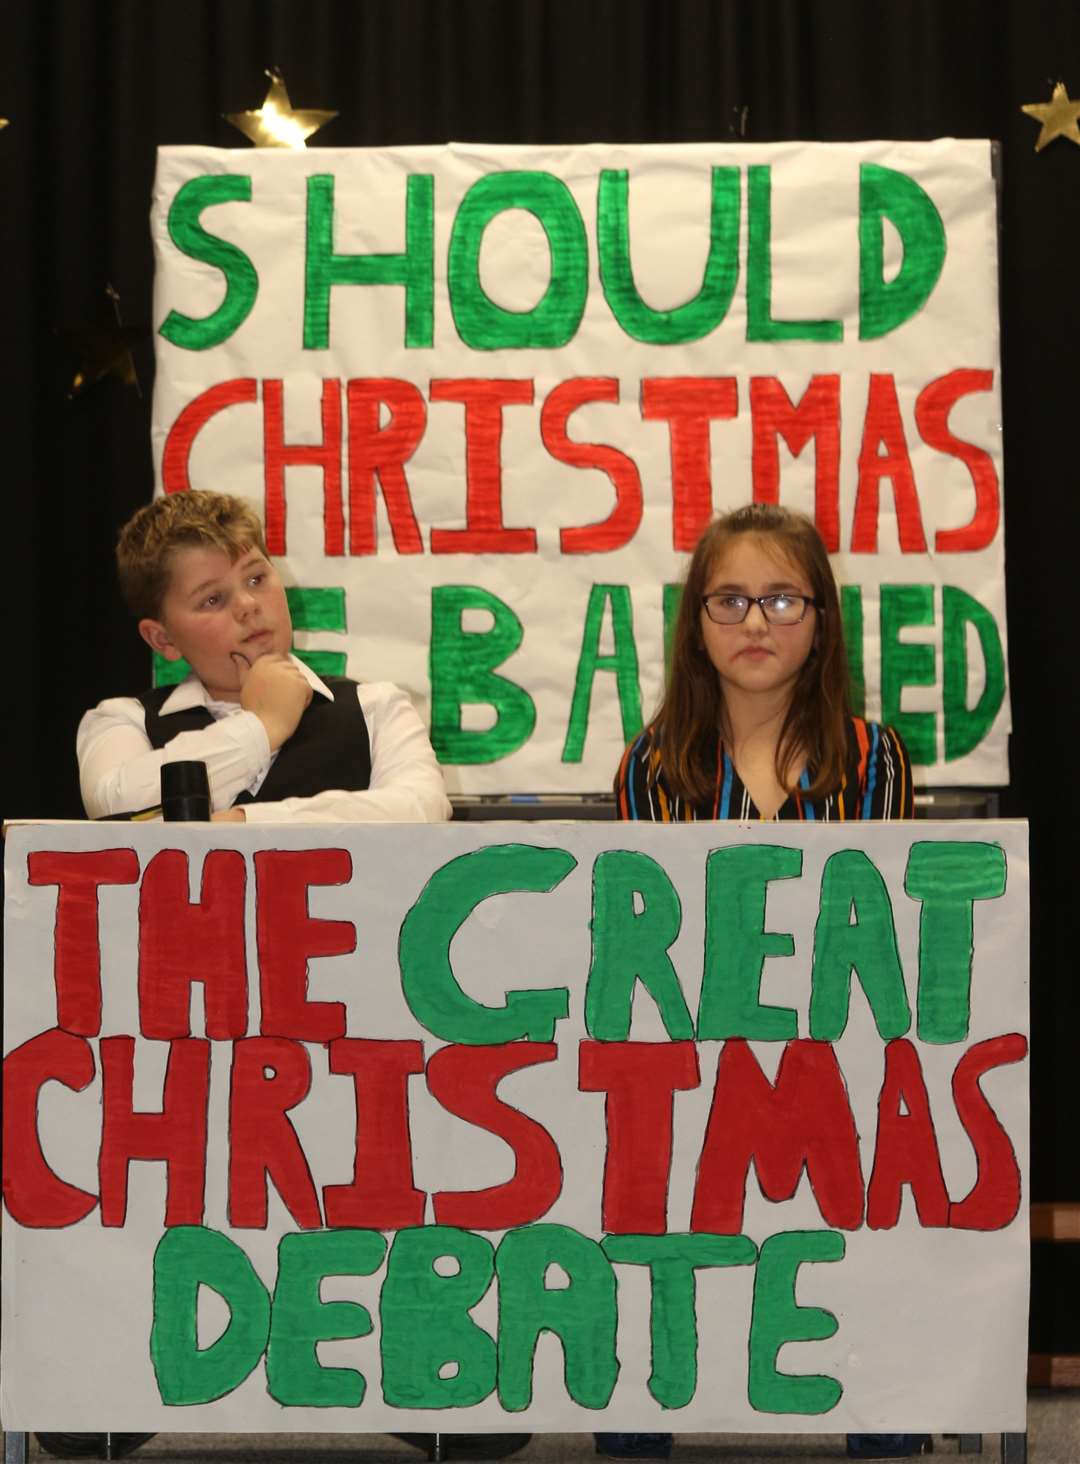 P6/7 pupils debate whether Christmas should be banned.